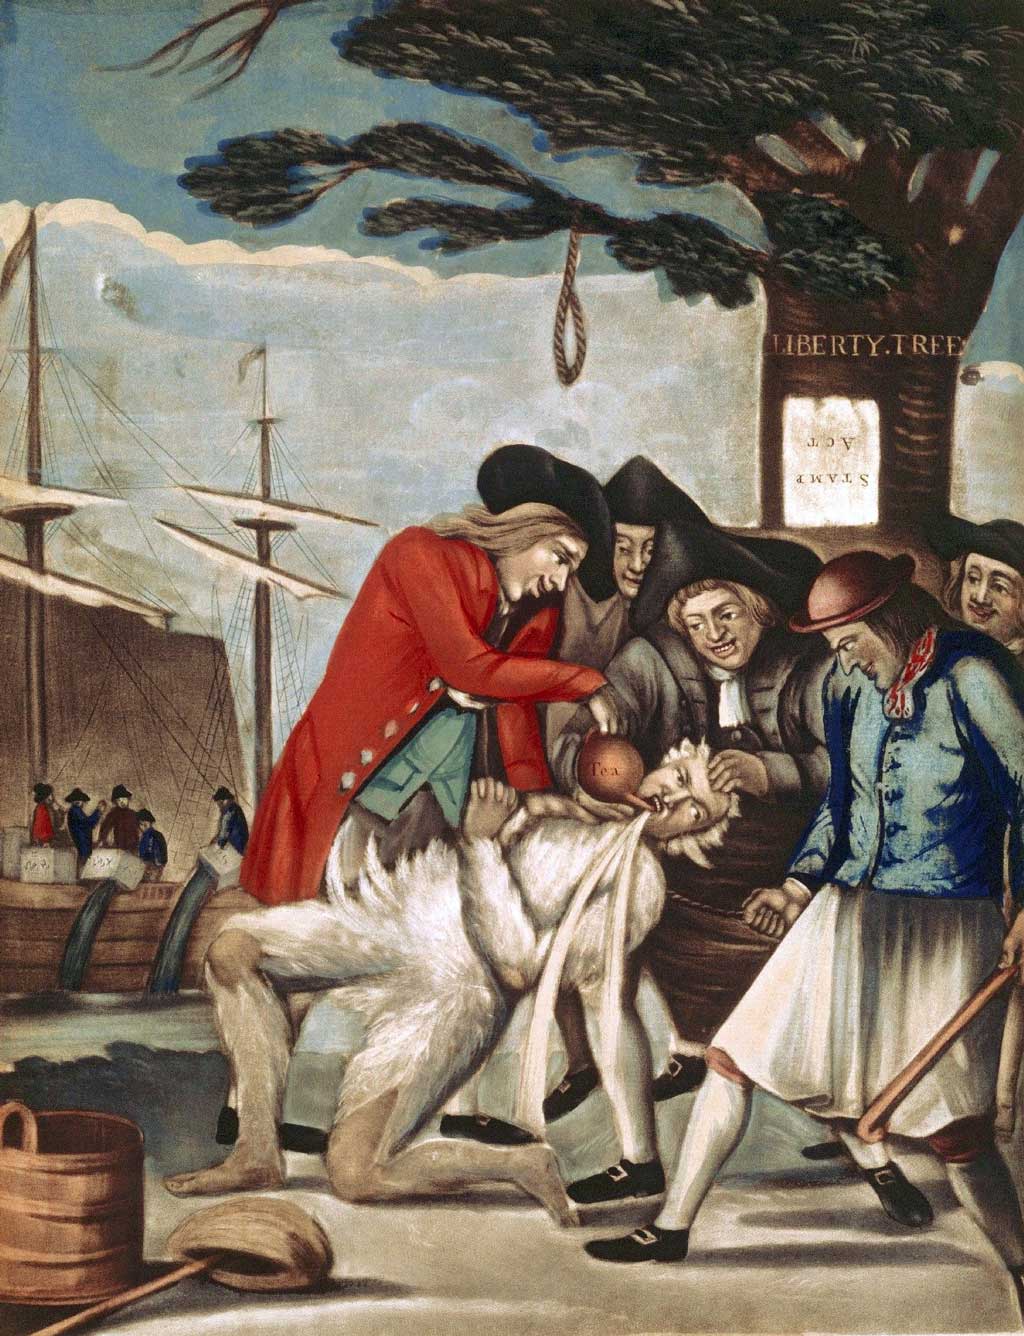 A depiction of the tarring and feathering of Commissioner of Customs John Malcolm, a Loyalist, by five Patriots on 5 January 1744 under the Liberty Tree in Boston, Massachusetts. Tea is also being poured into Malcolm's mouth.